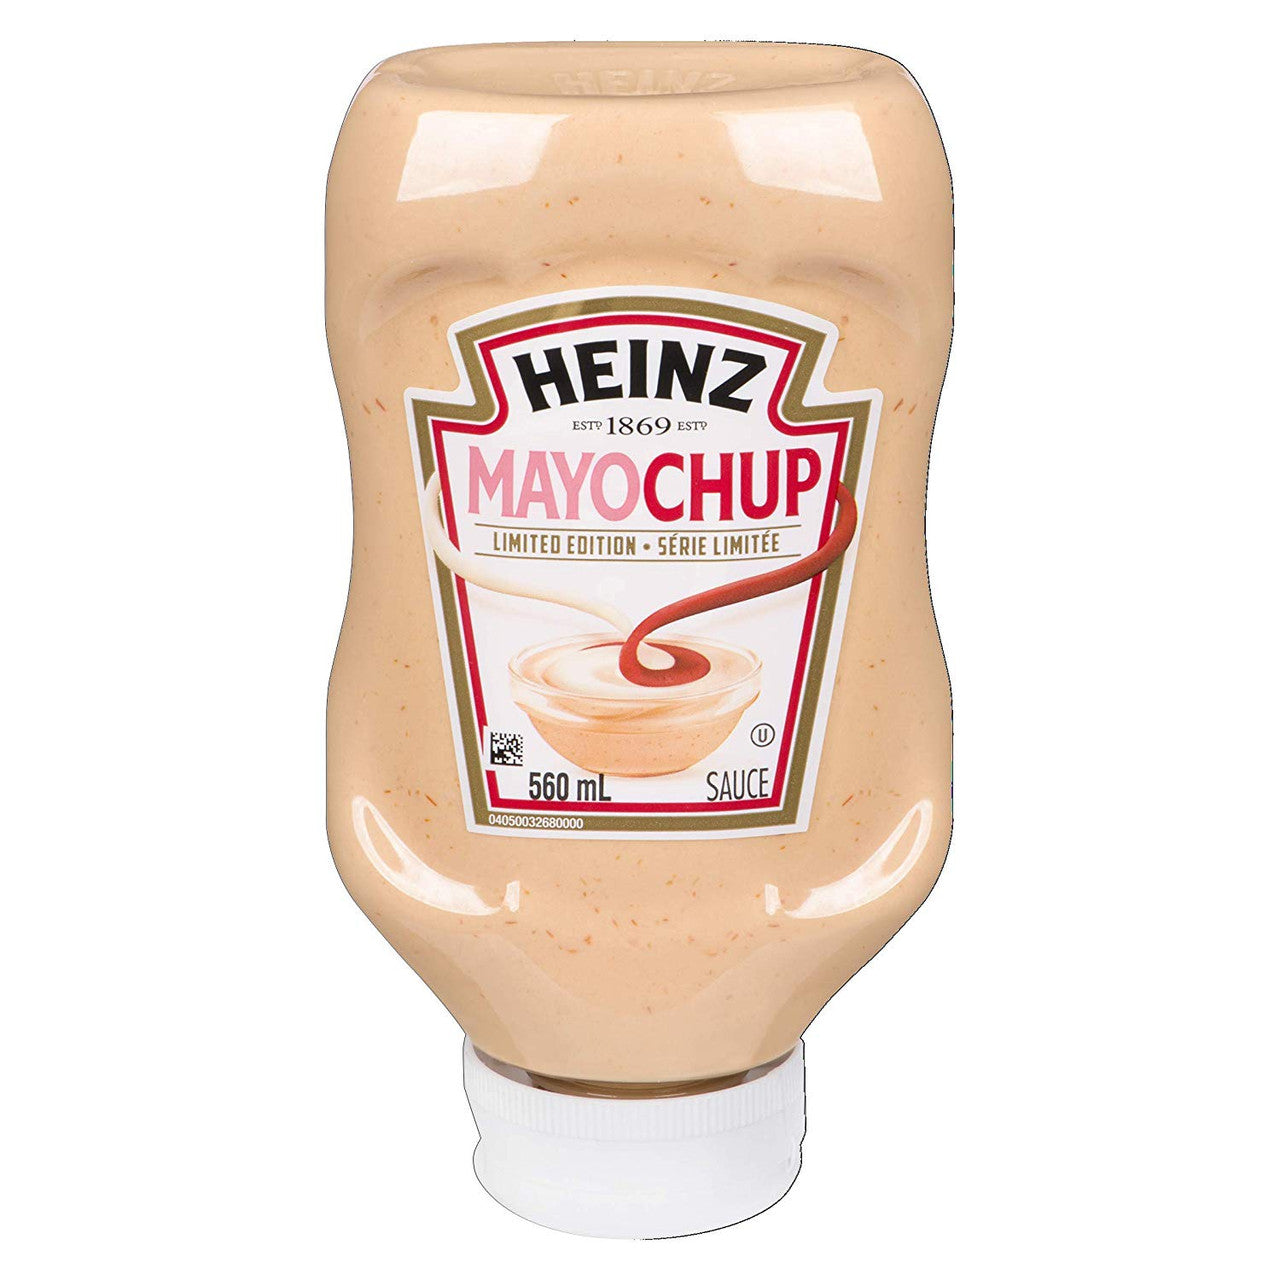 Heinz Mayochup Sauce, 560mL/18.9oz, Bottle, Limited Canadian Edition, (Imported from Canada)